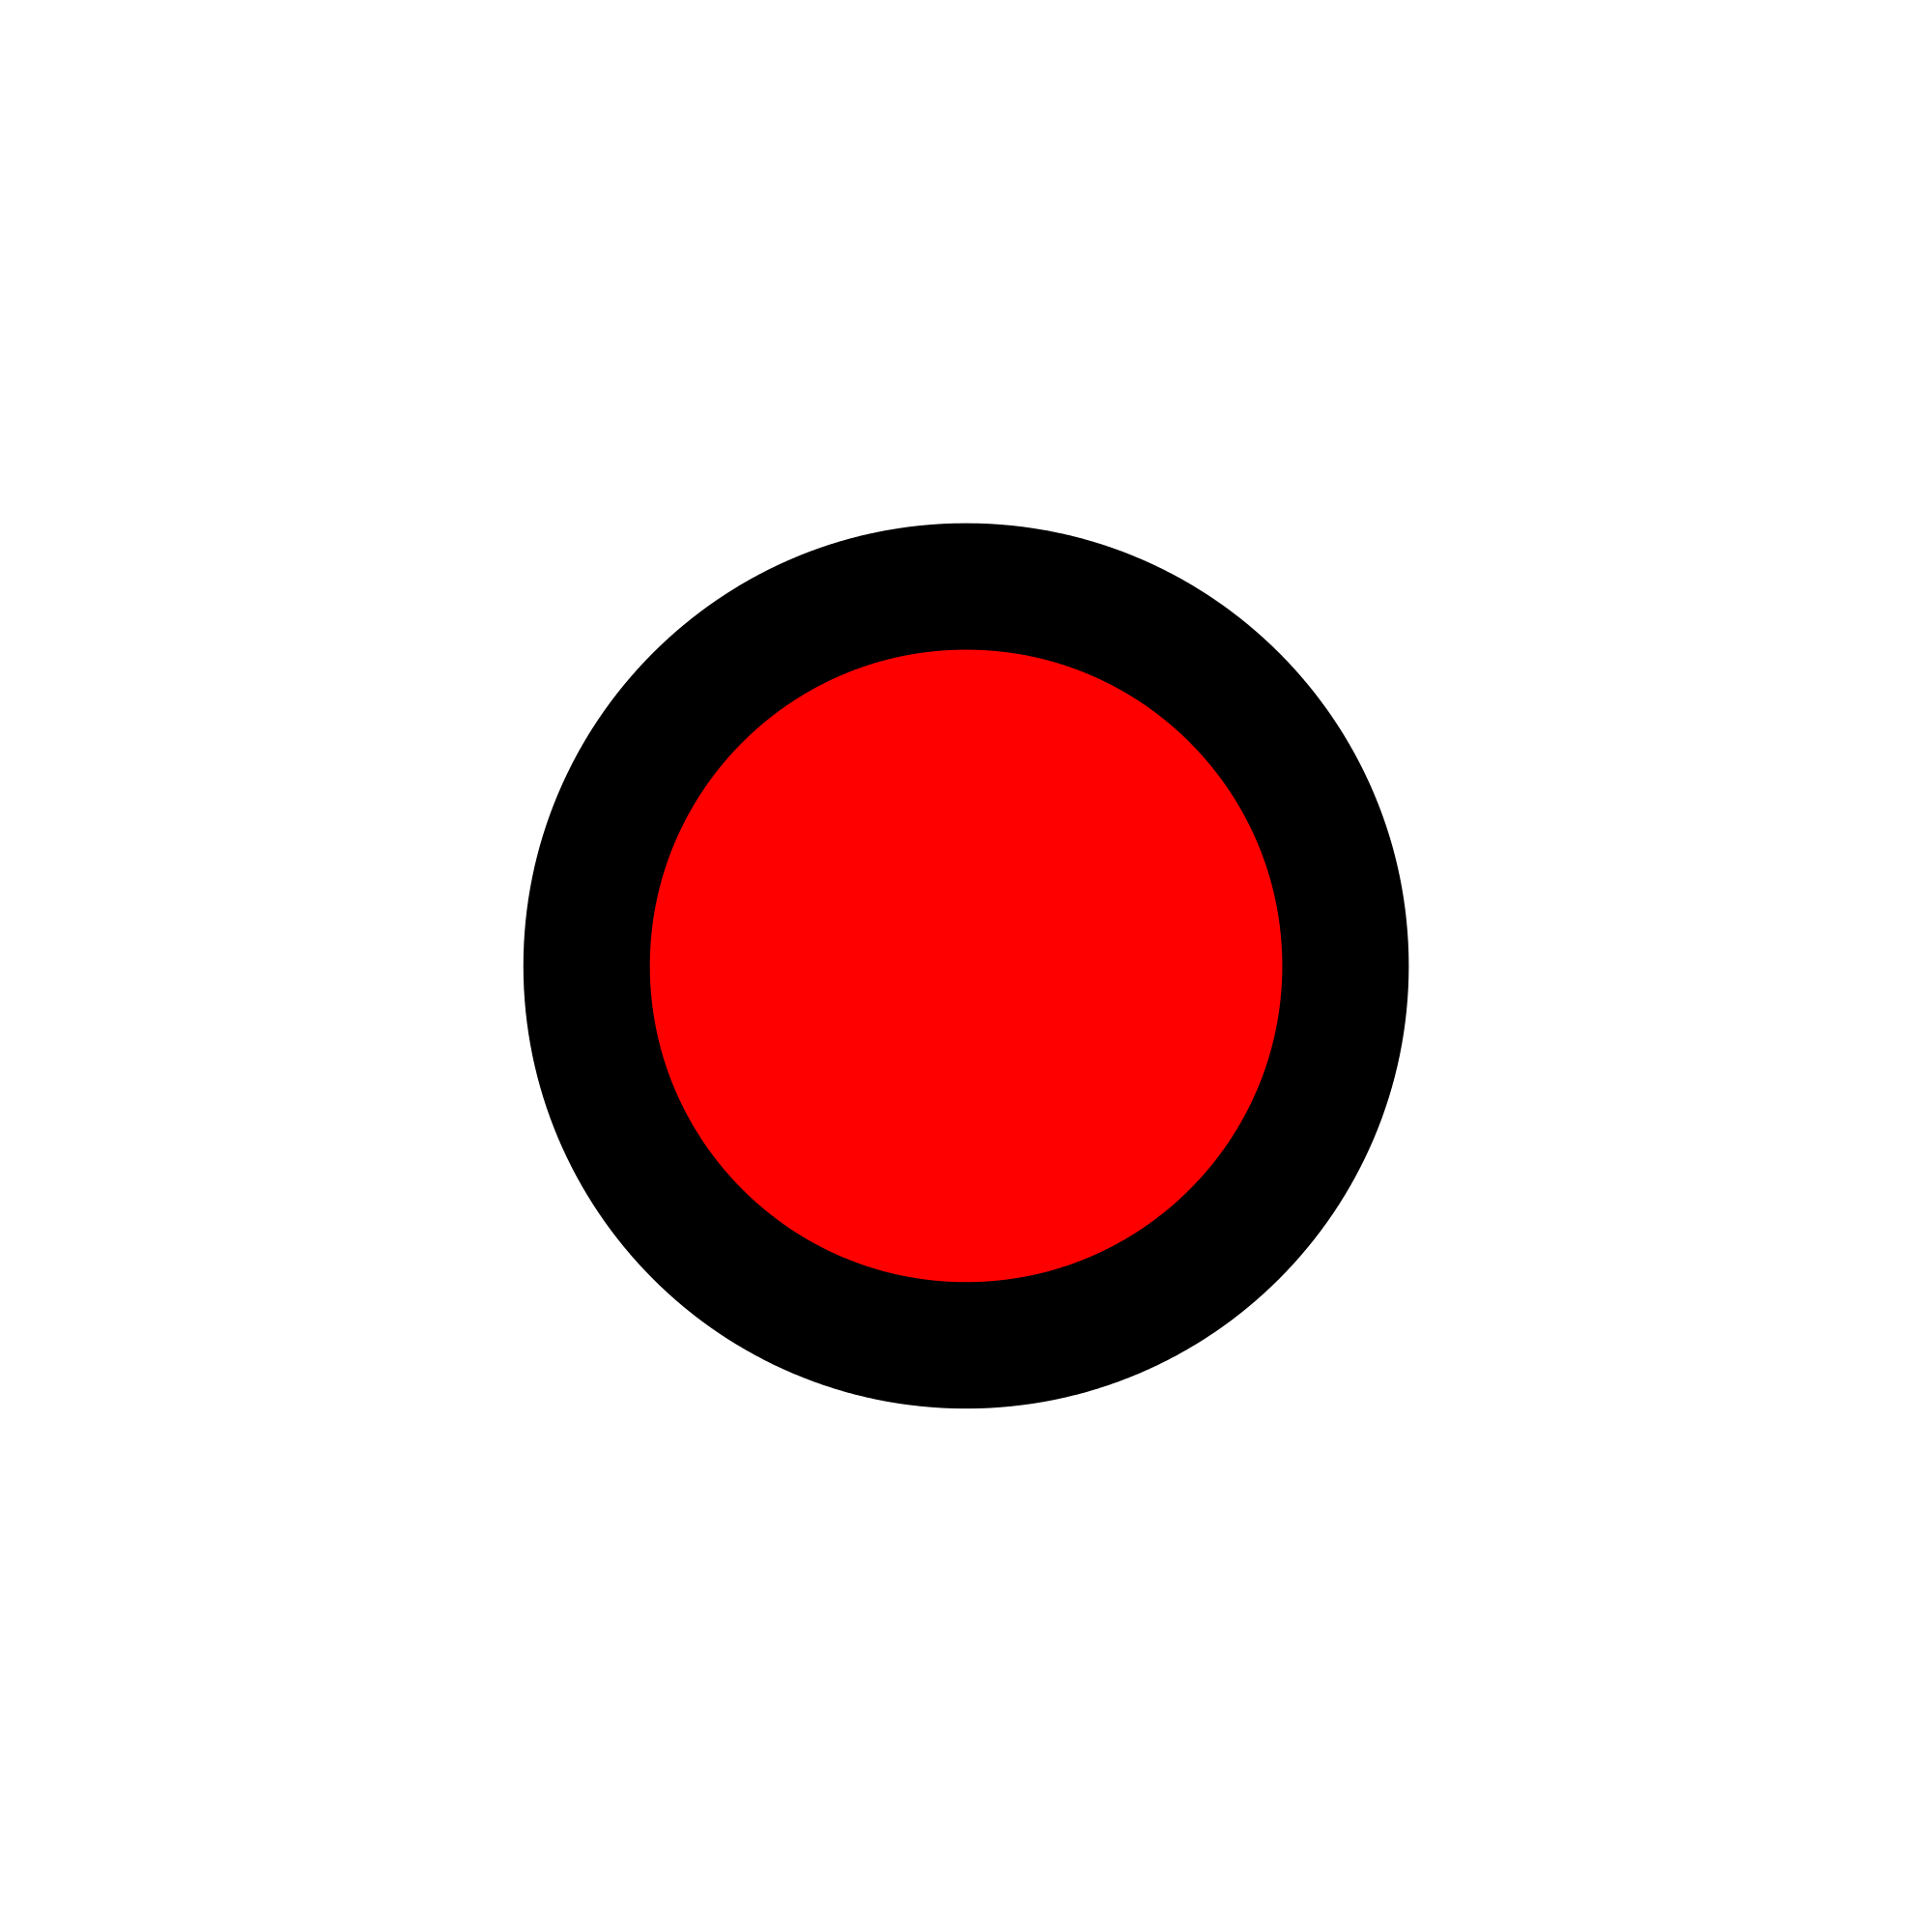 Blue and Red Dot Logo - City locator 14.svg